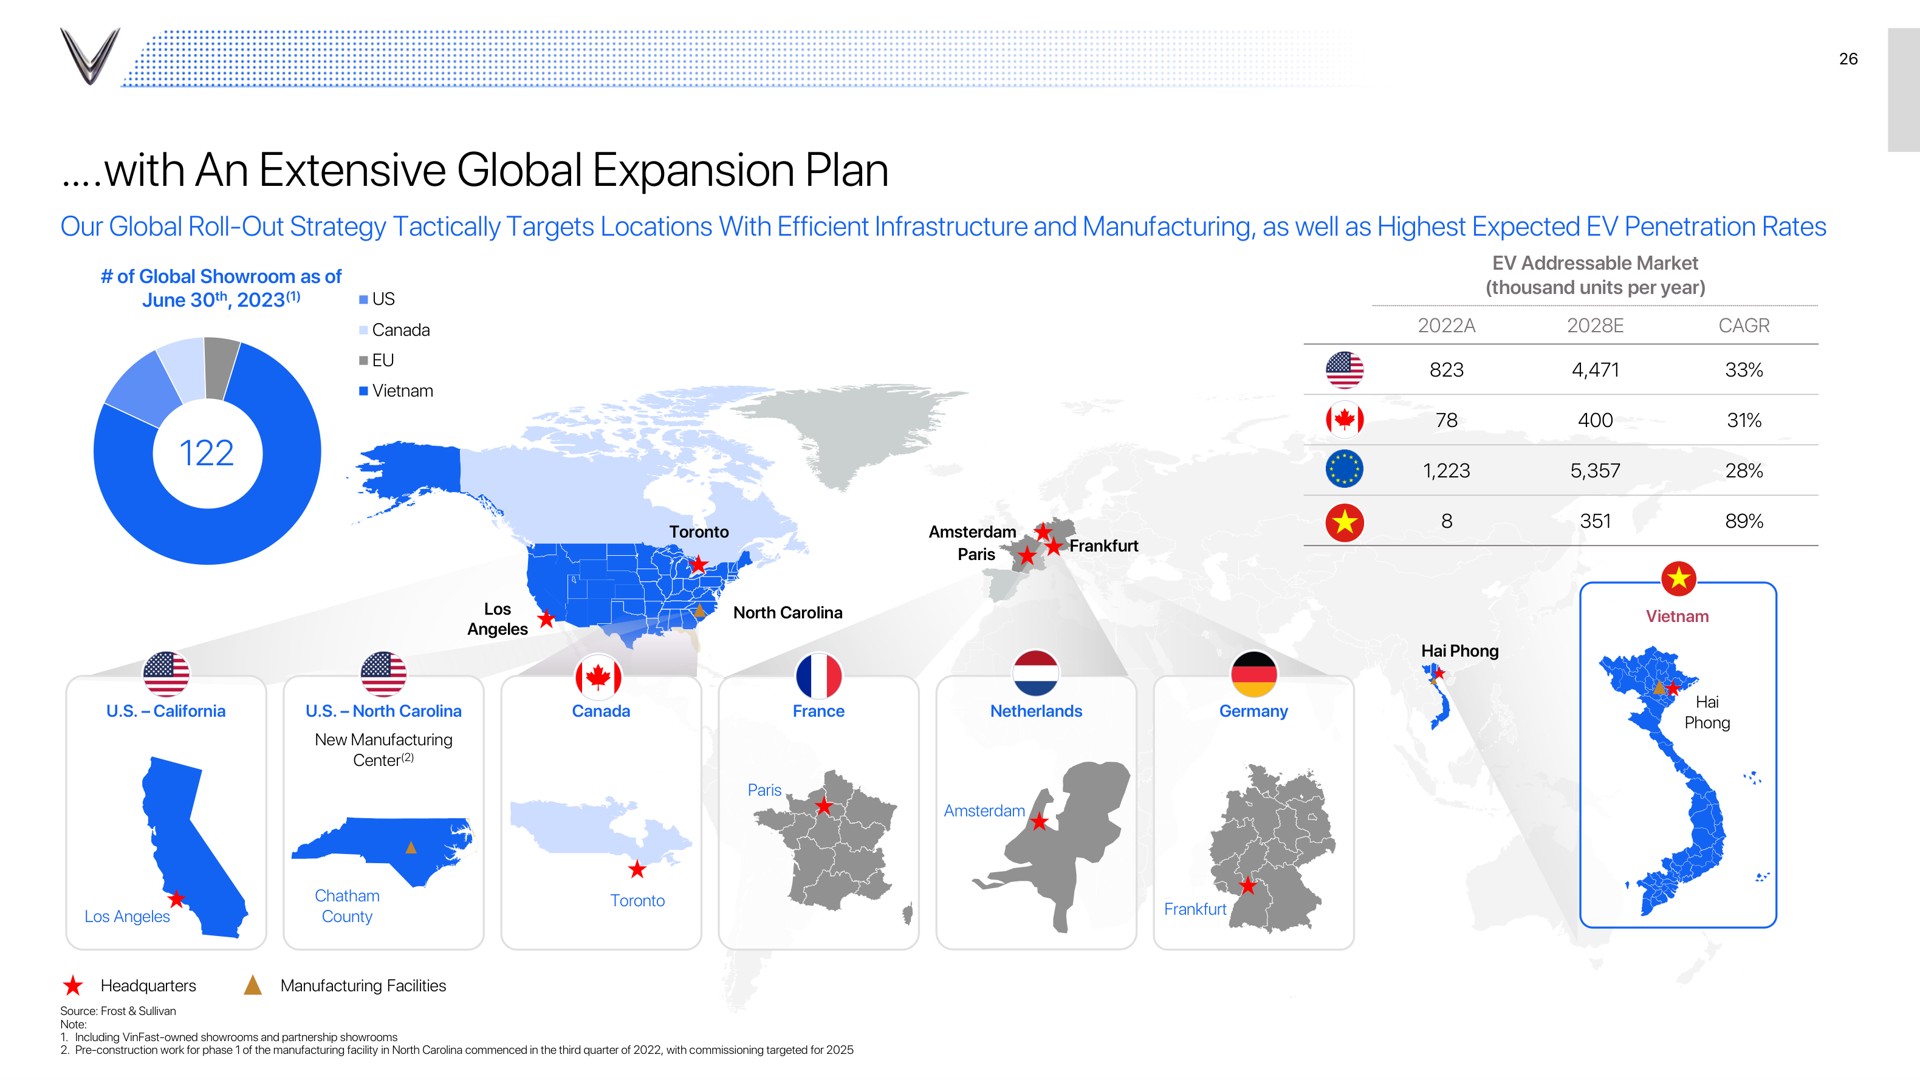 with an extensive global expansion plan a | VinFast